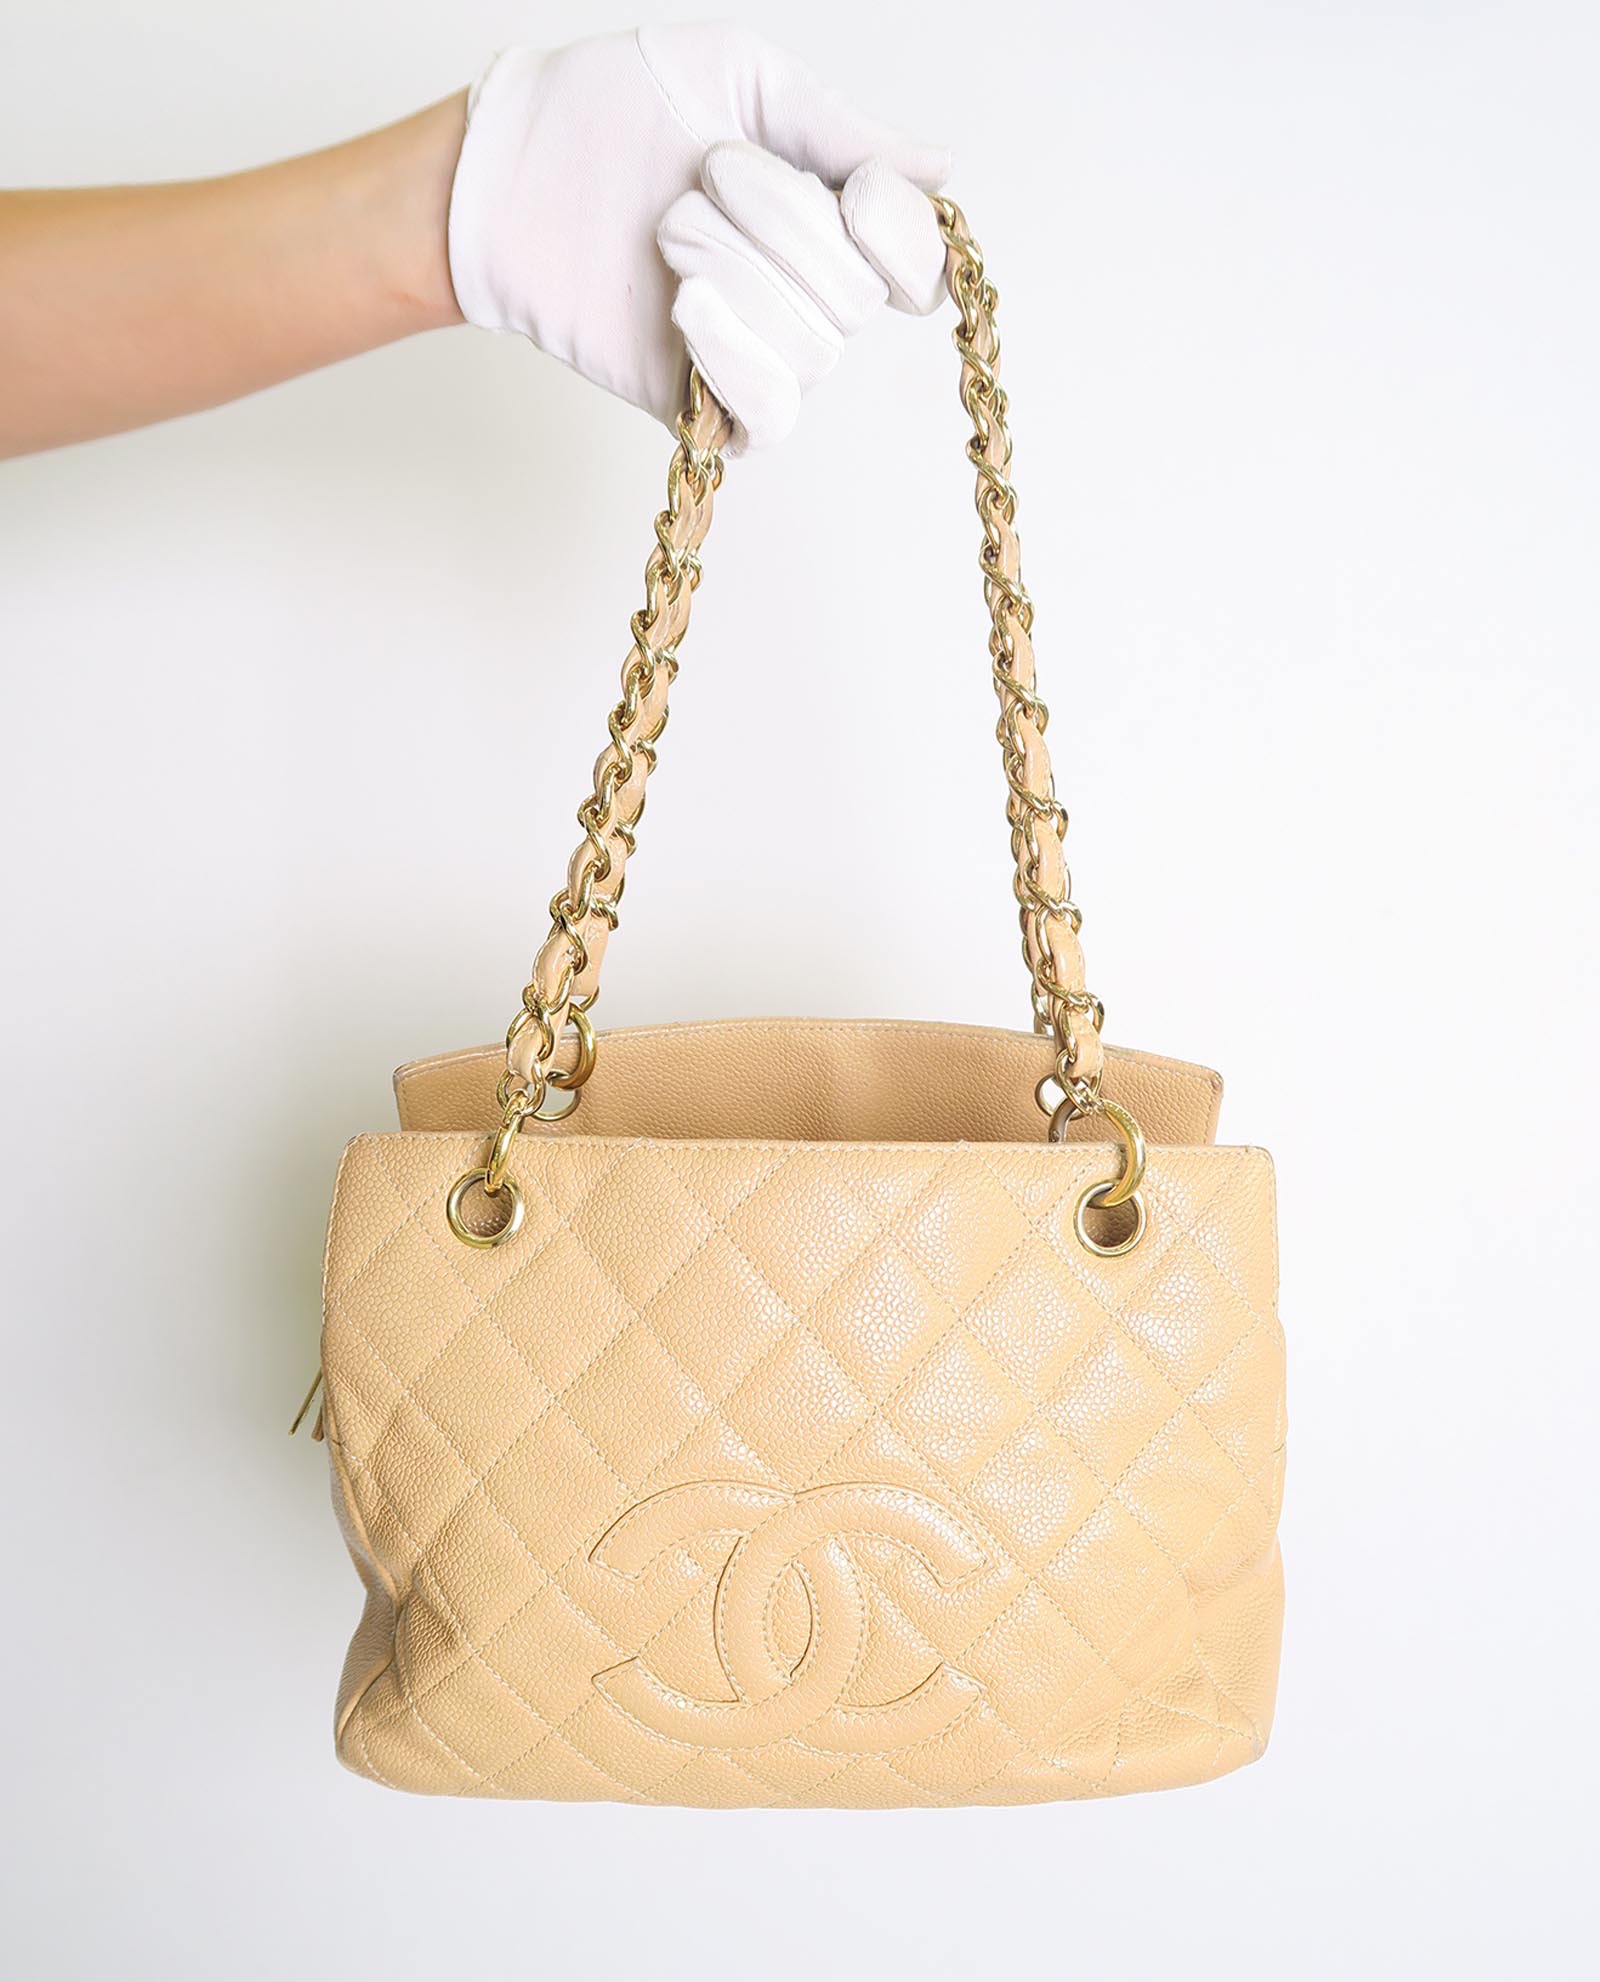 Chanel Petit Shopping Handbag in Cream Color Quilted Leather